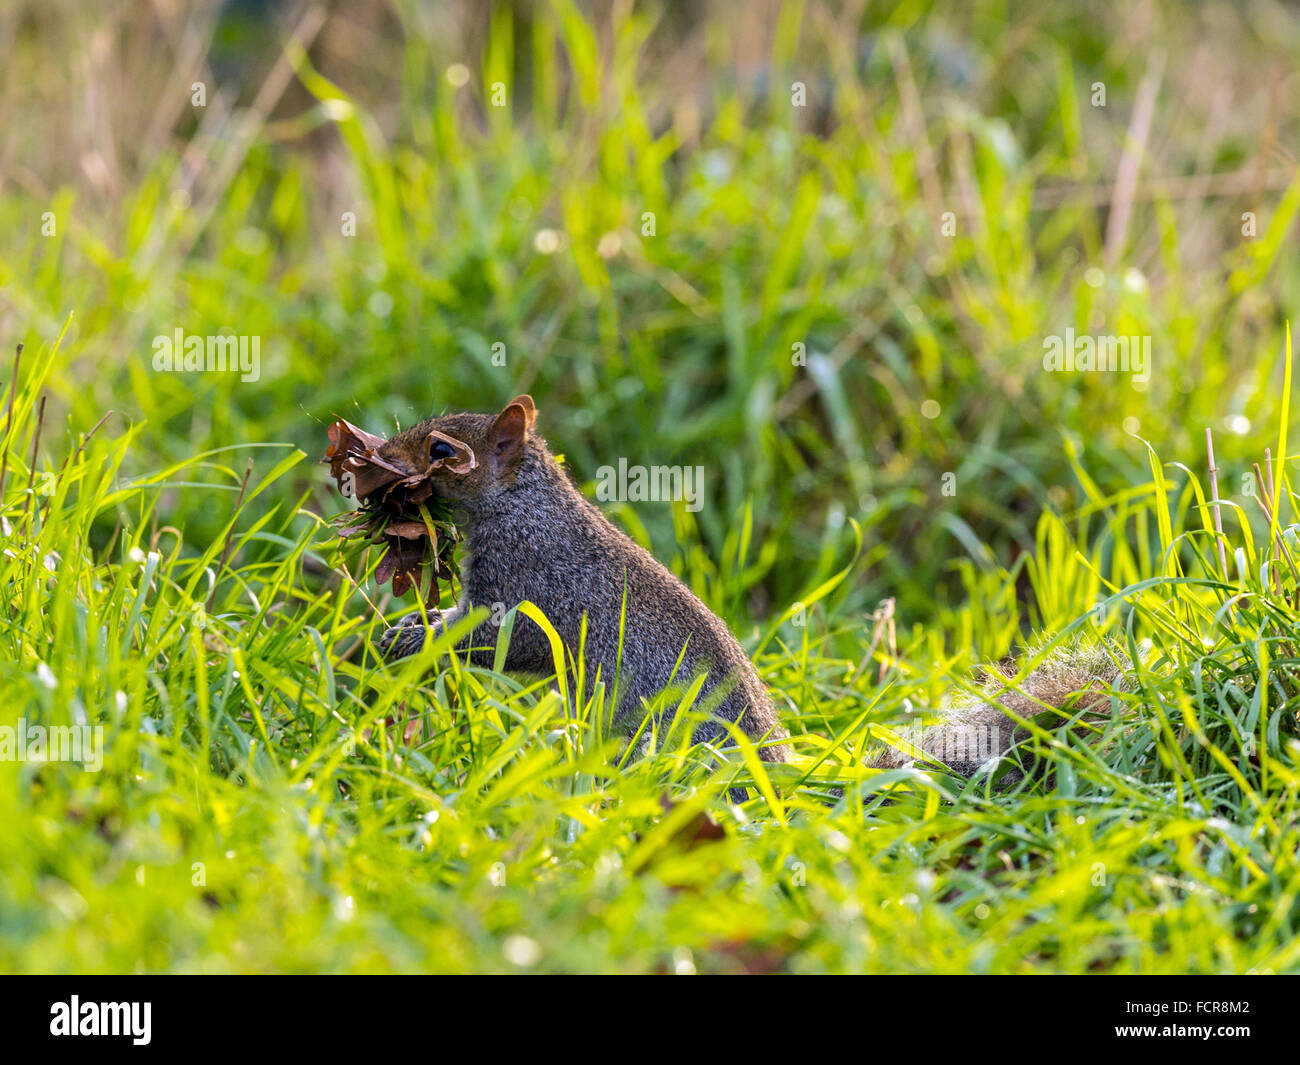 Single Grey Squirrel (Sciurus carolinensis) in natural woodland countryside setting.'Posing on the ground carrying leaf mold' Stock Photo